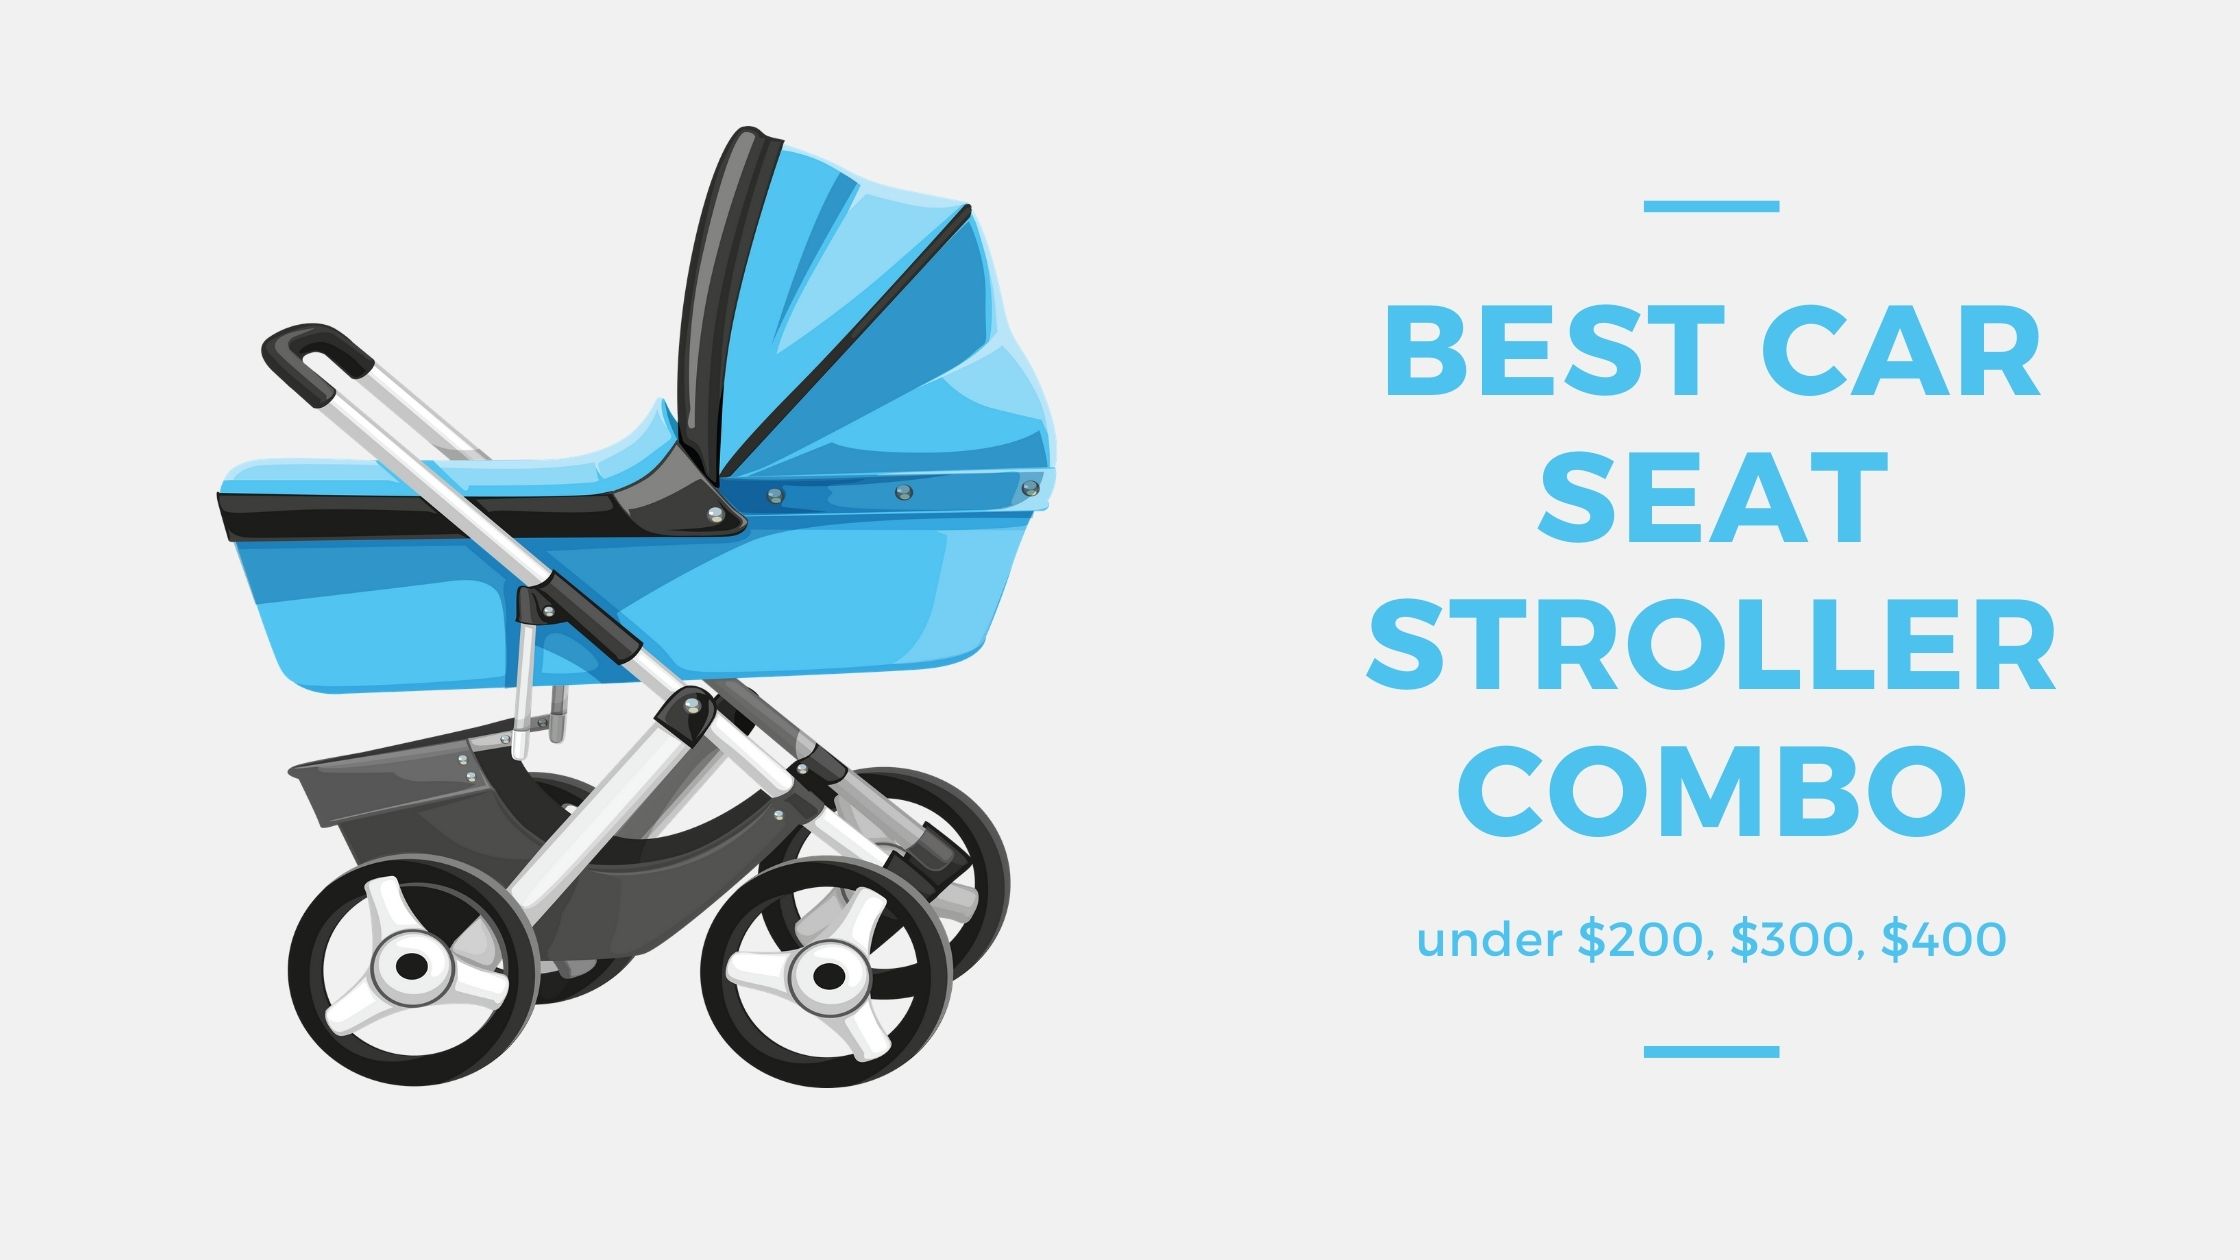 You are currently viewing 11 Best car seat stroller combo under $200, $300, $400